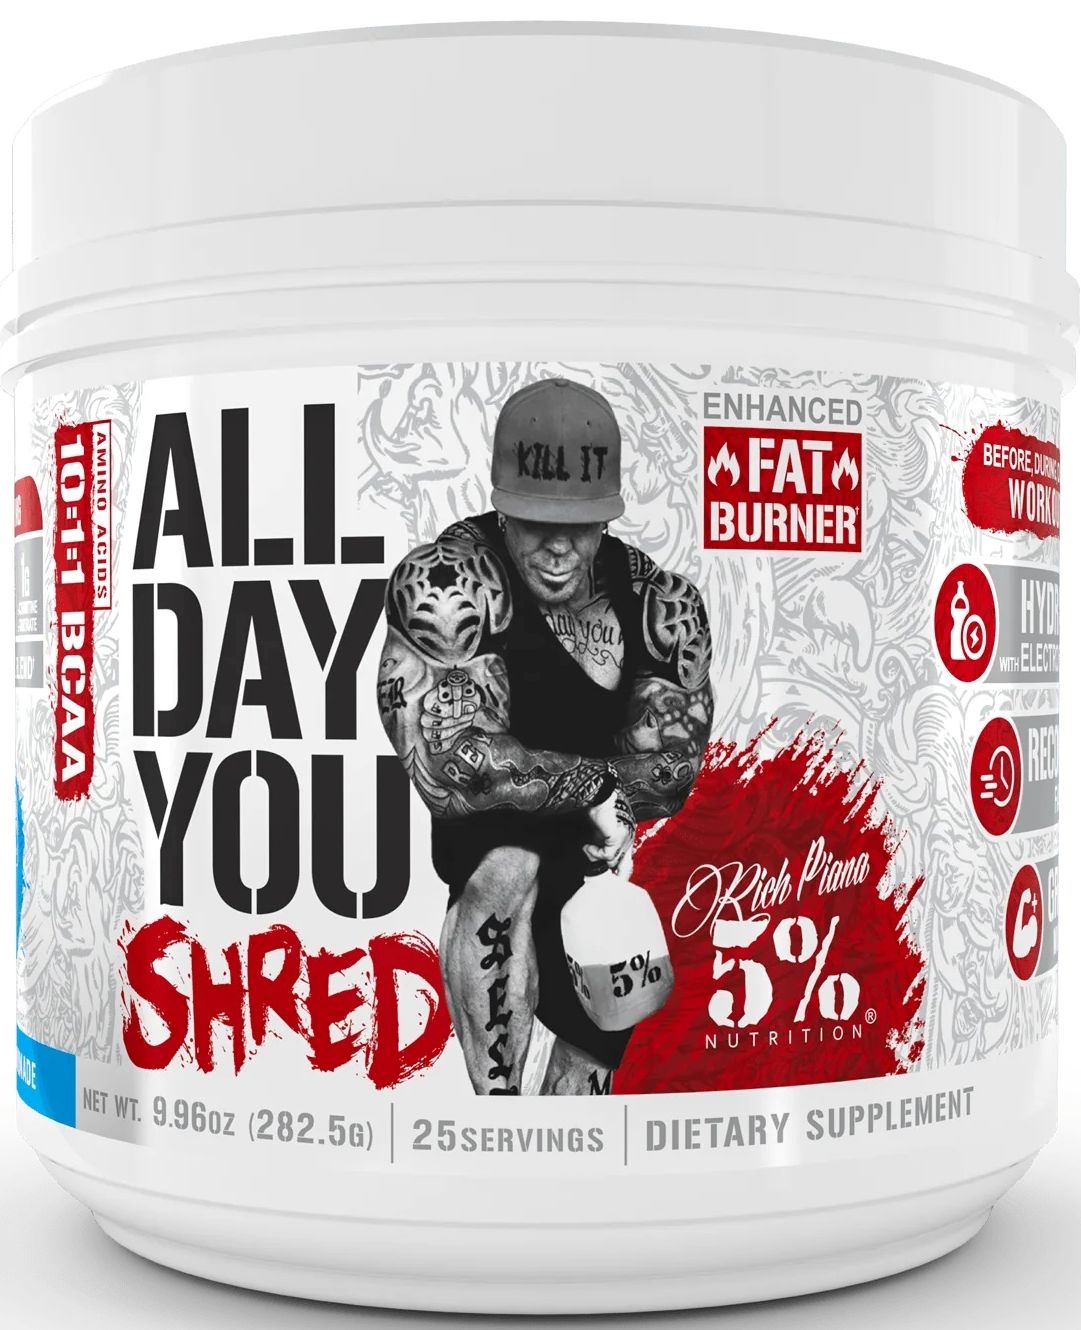 5% Nutrition All Day You Shred Pre-WorkoutLowcostvitamin.com